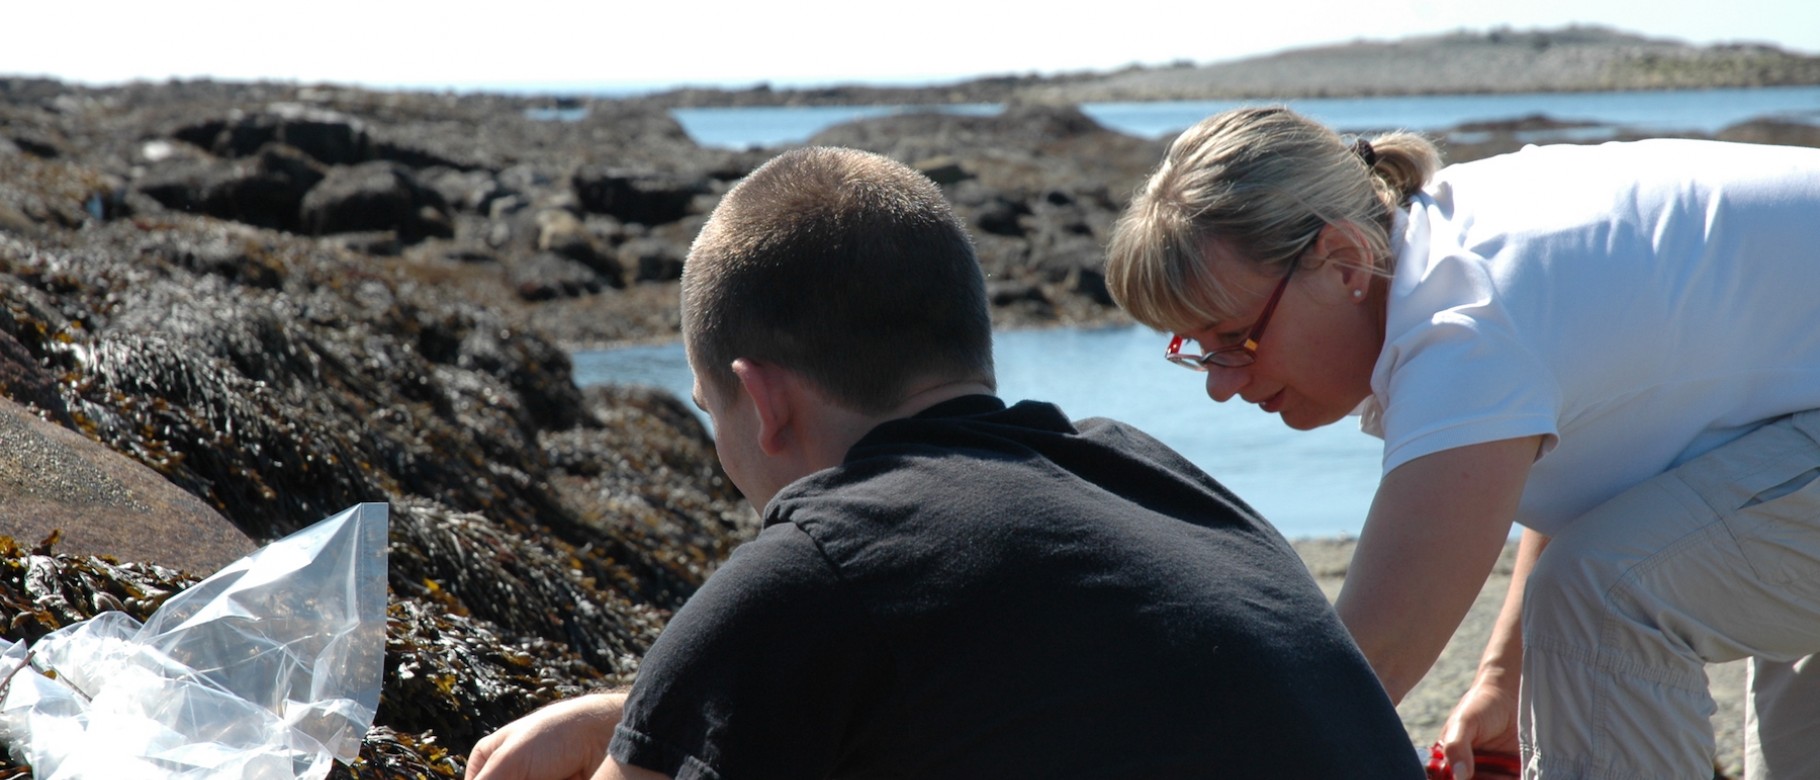 Kyle Martin and Ursula Röse, set up field experiments to investigate chemical defense compounds of brown algae.